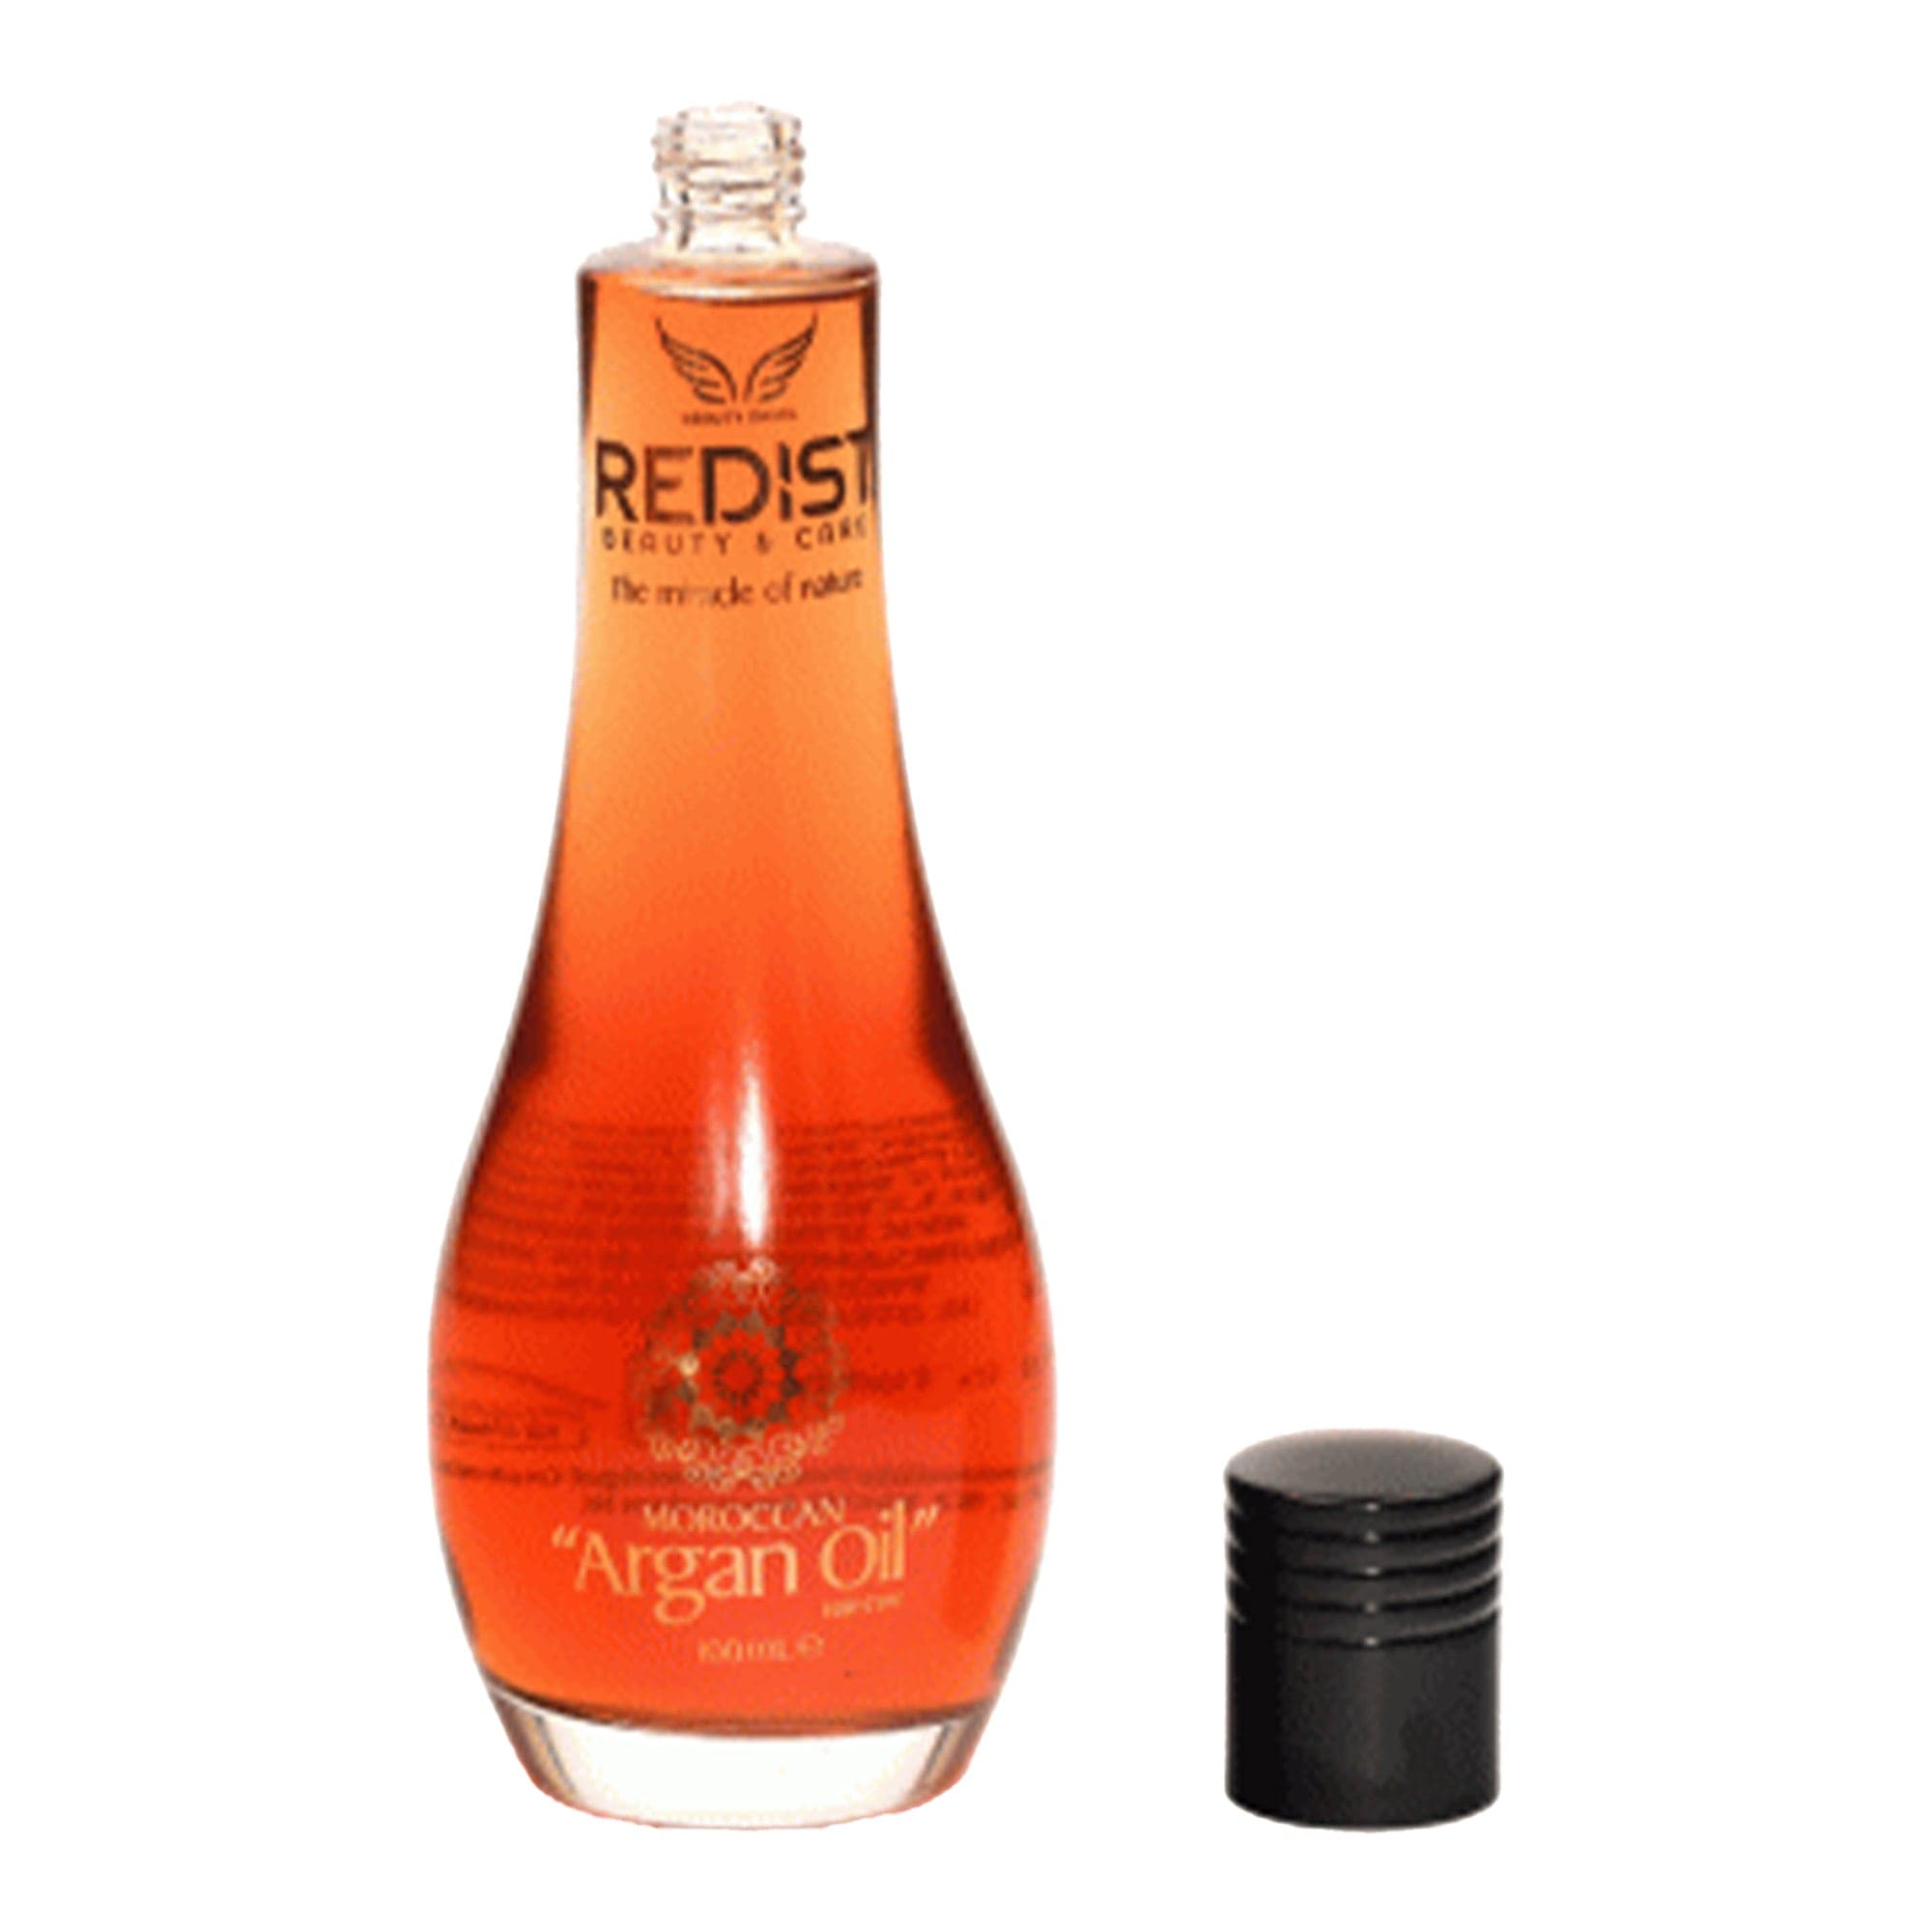 Redist - The Miracle of Nature Moroccan Argan Oil Hair Care 100ml